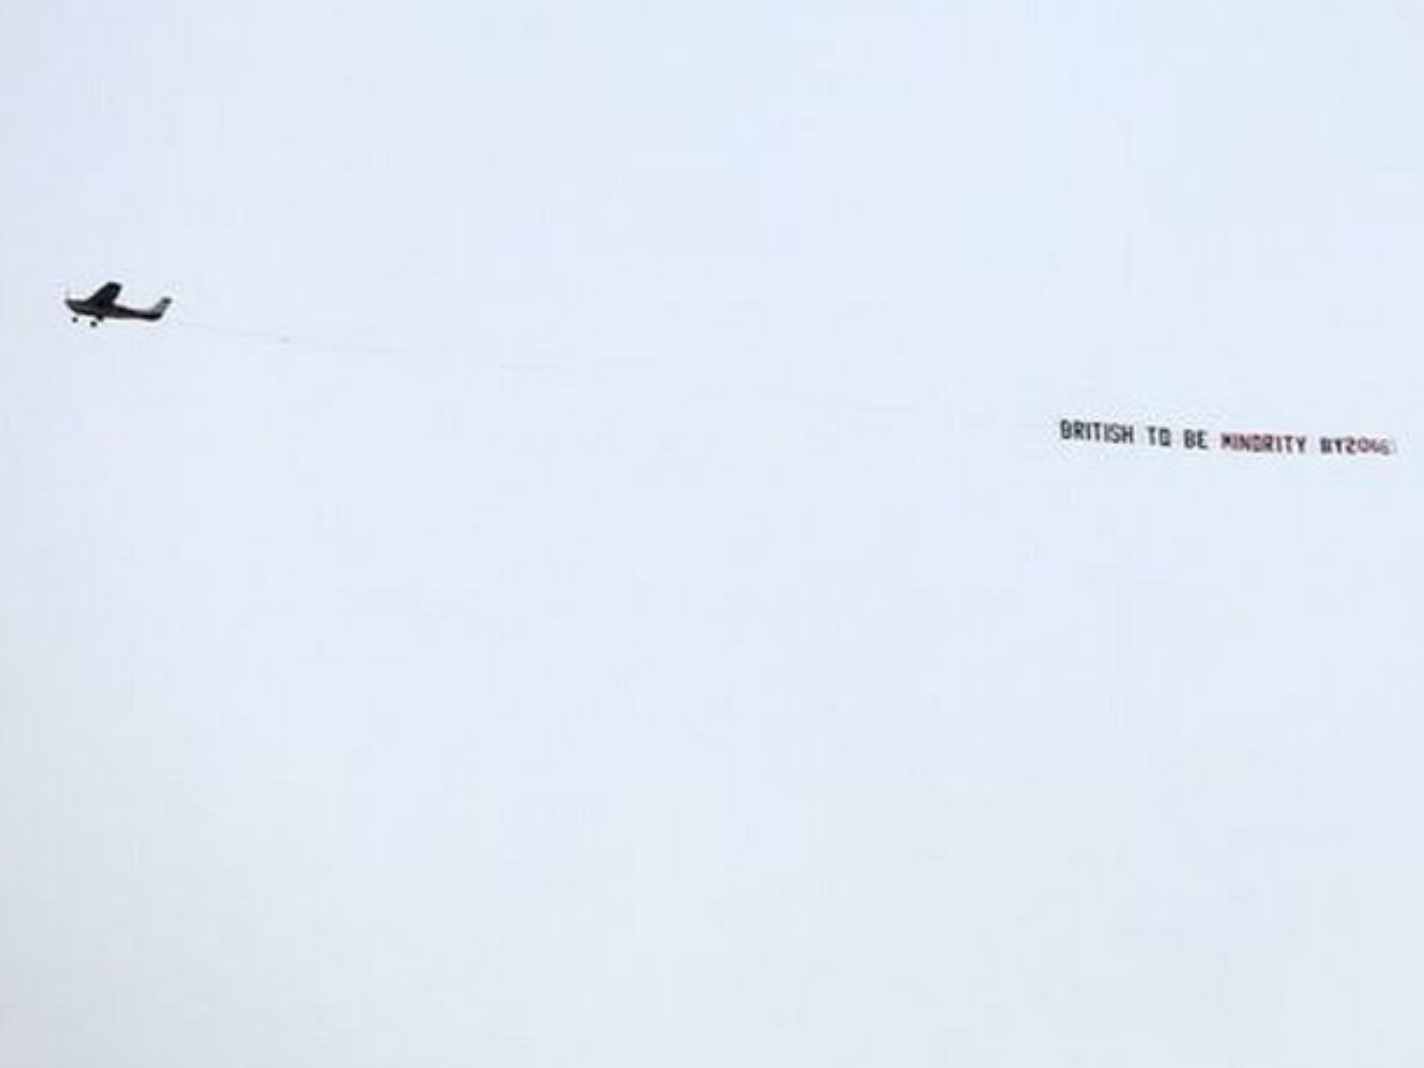 The Racist Banner That Loomed Over Etihad Before Liverpol v Man City Kick-Off